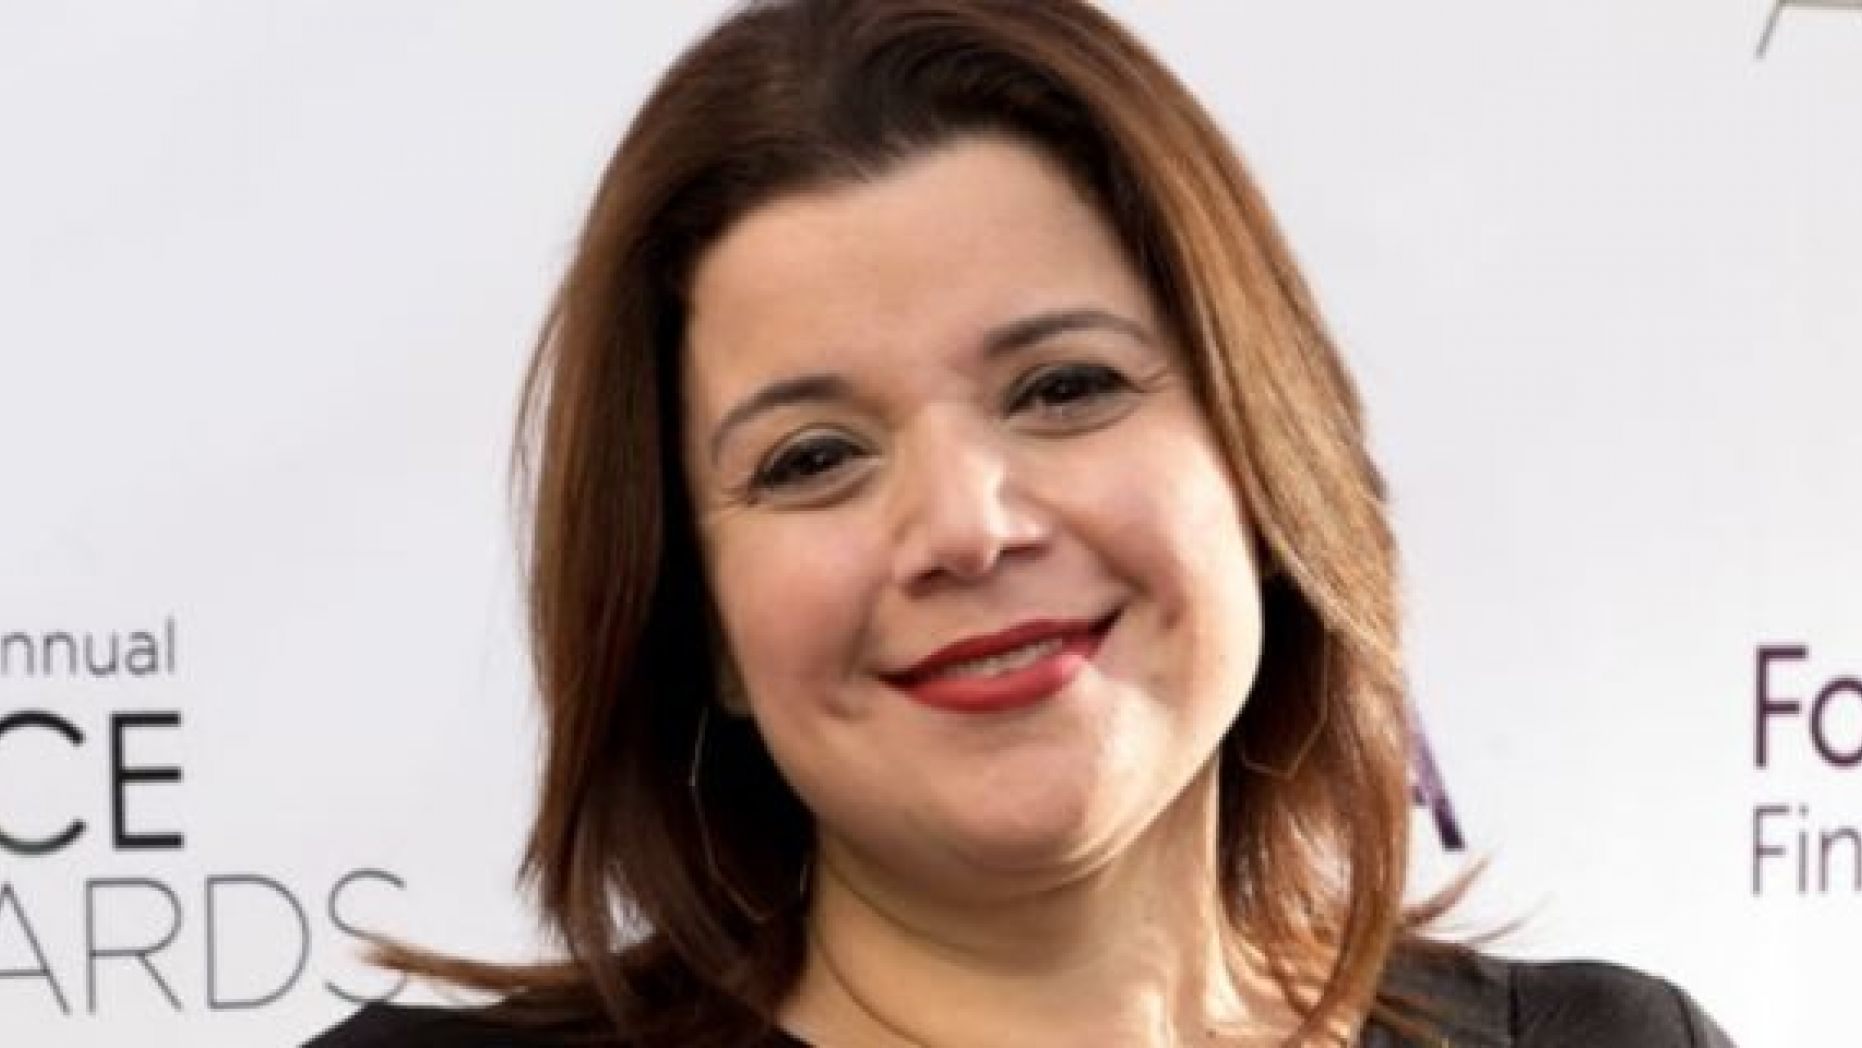 CNN's Ana Navarro will guest host "The View" every Friday.